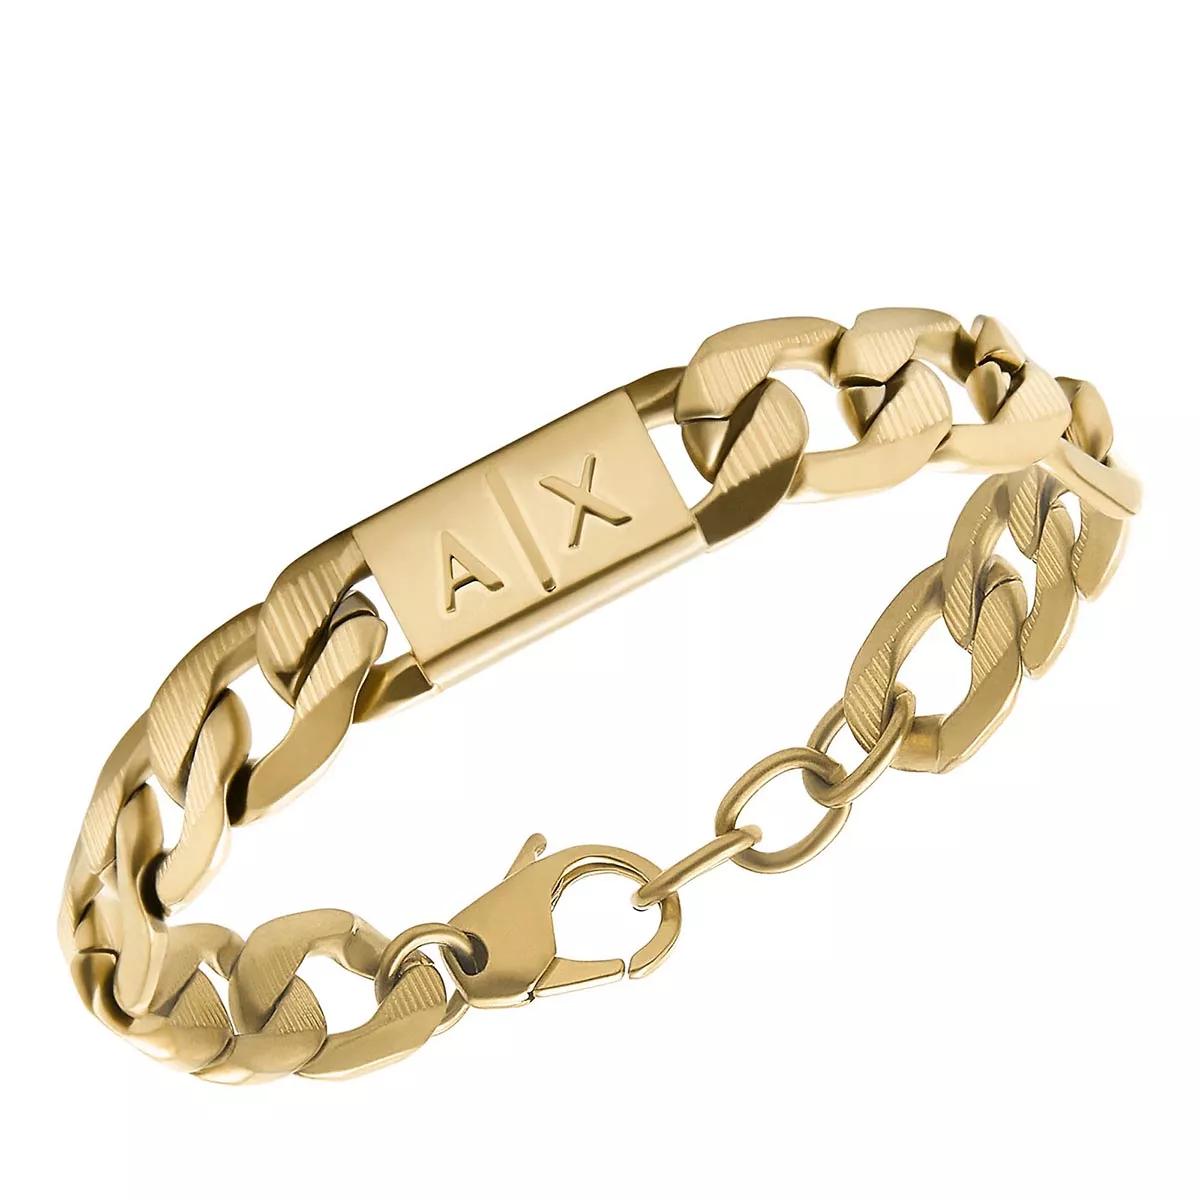 Bracelet Steel Exchange Armani Chain Gold | Stainless Armband